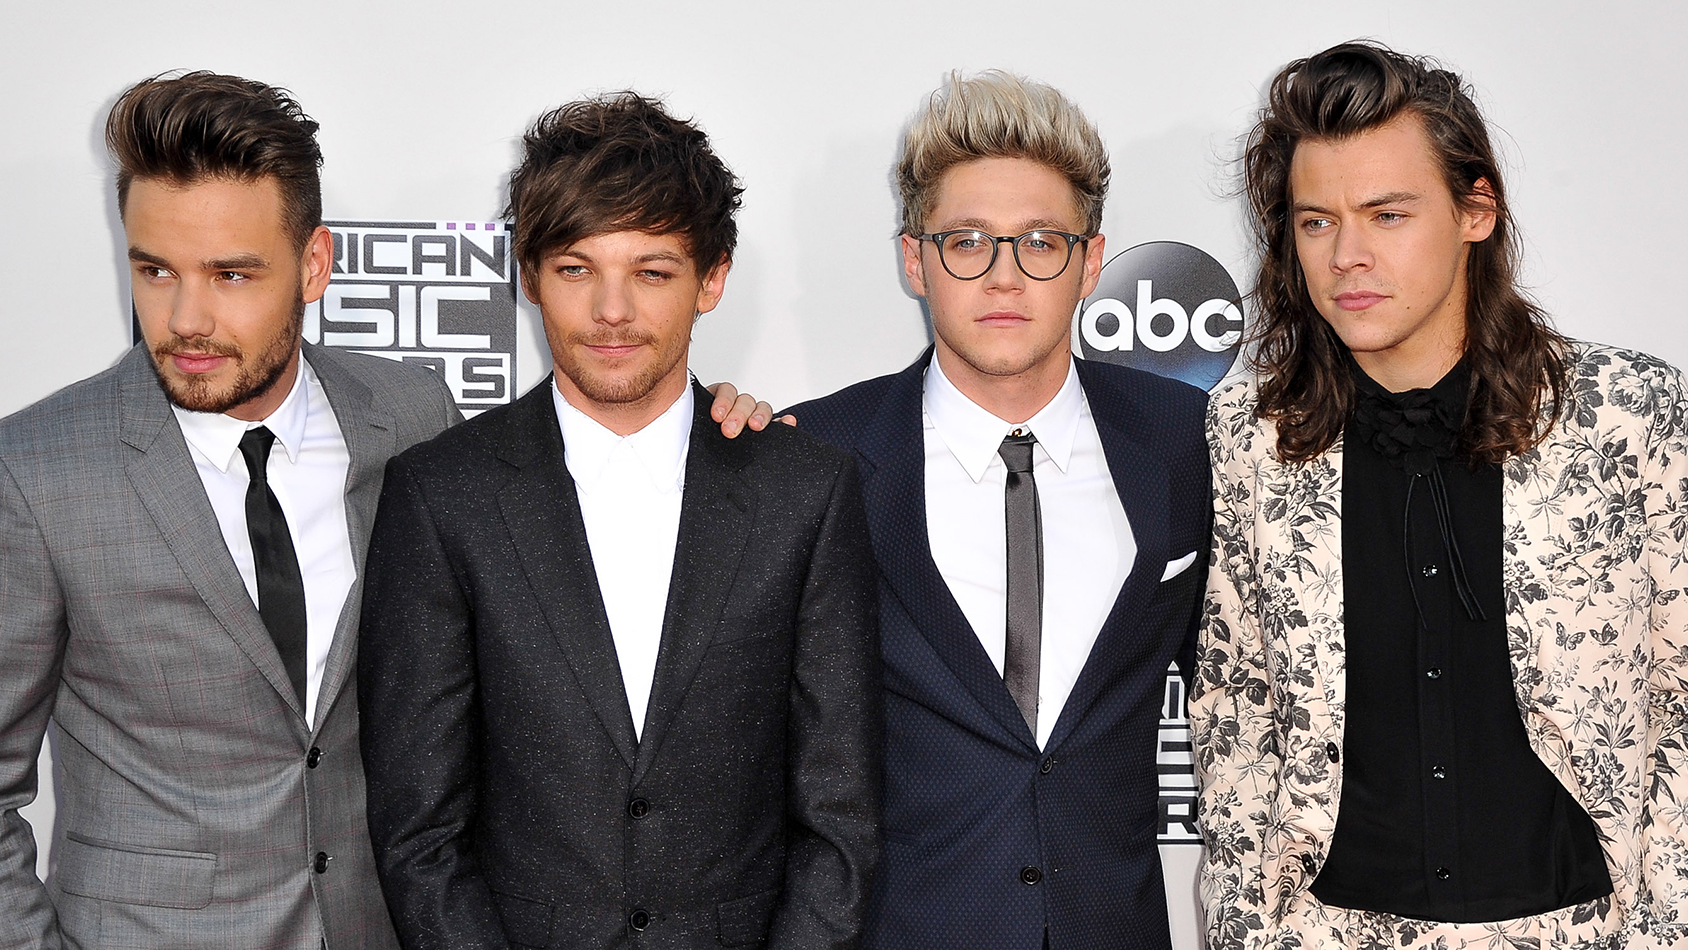 One Direction: Who Wrote The Most Songs In The Band?